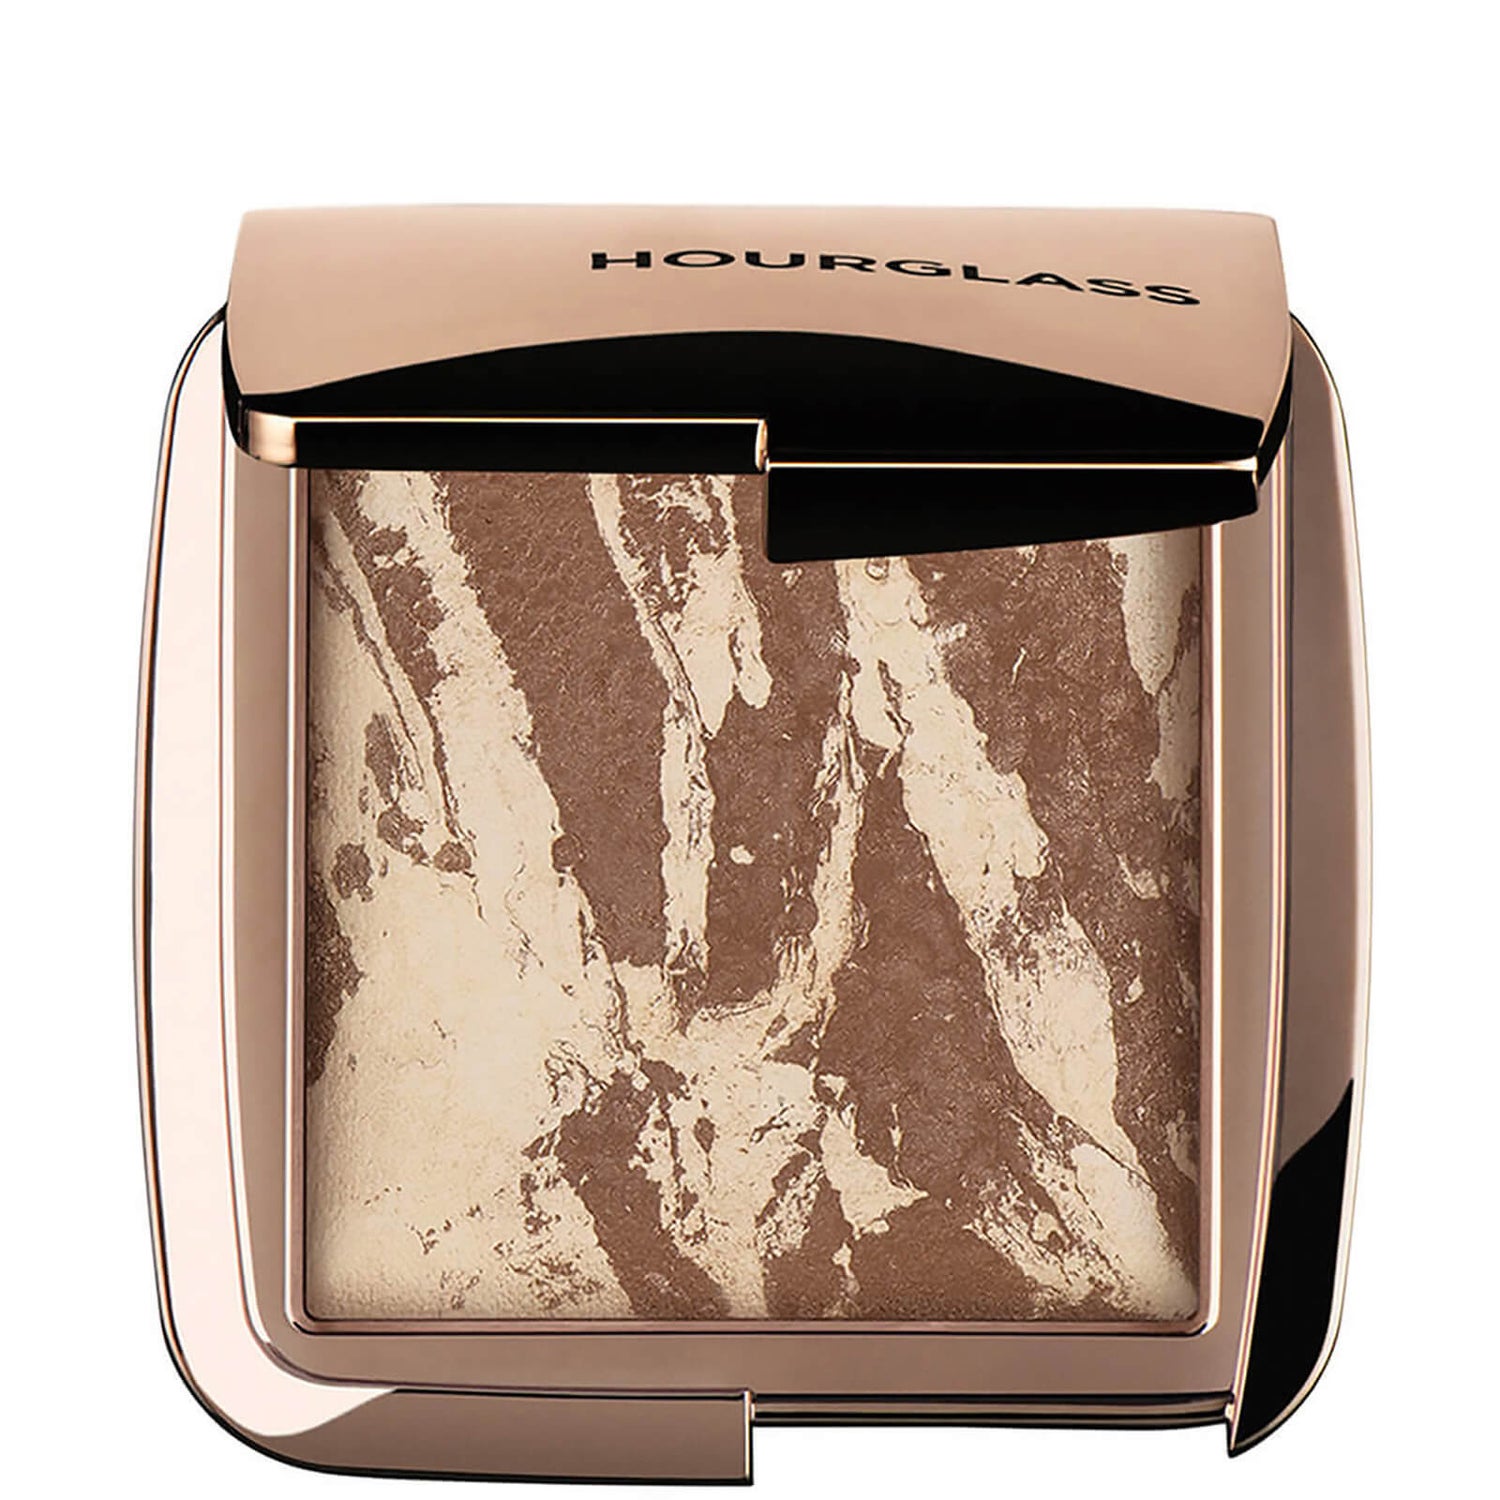 Hourglass Ambient Lighting Bronzer - Travel Size Diffused Bronze Light